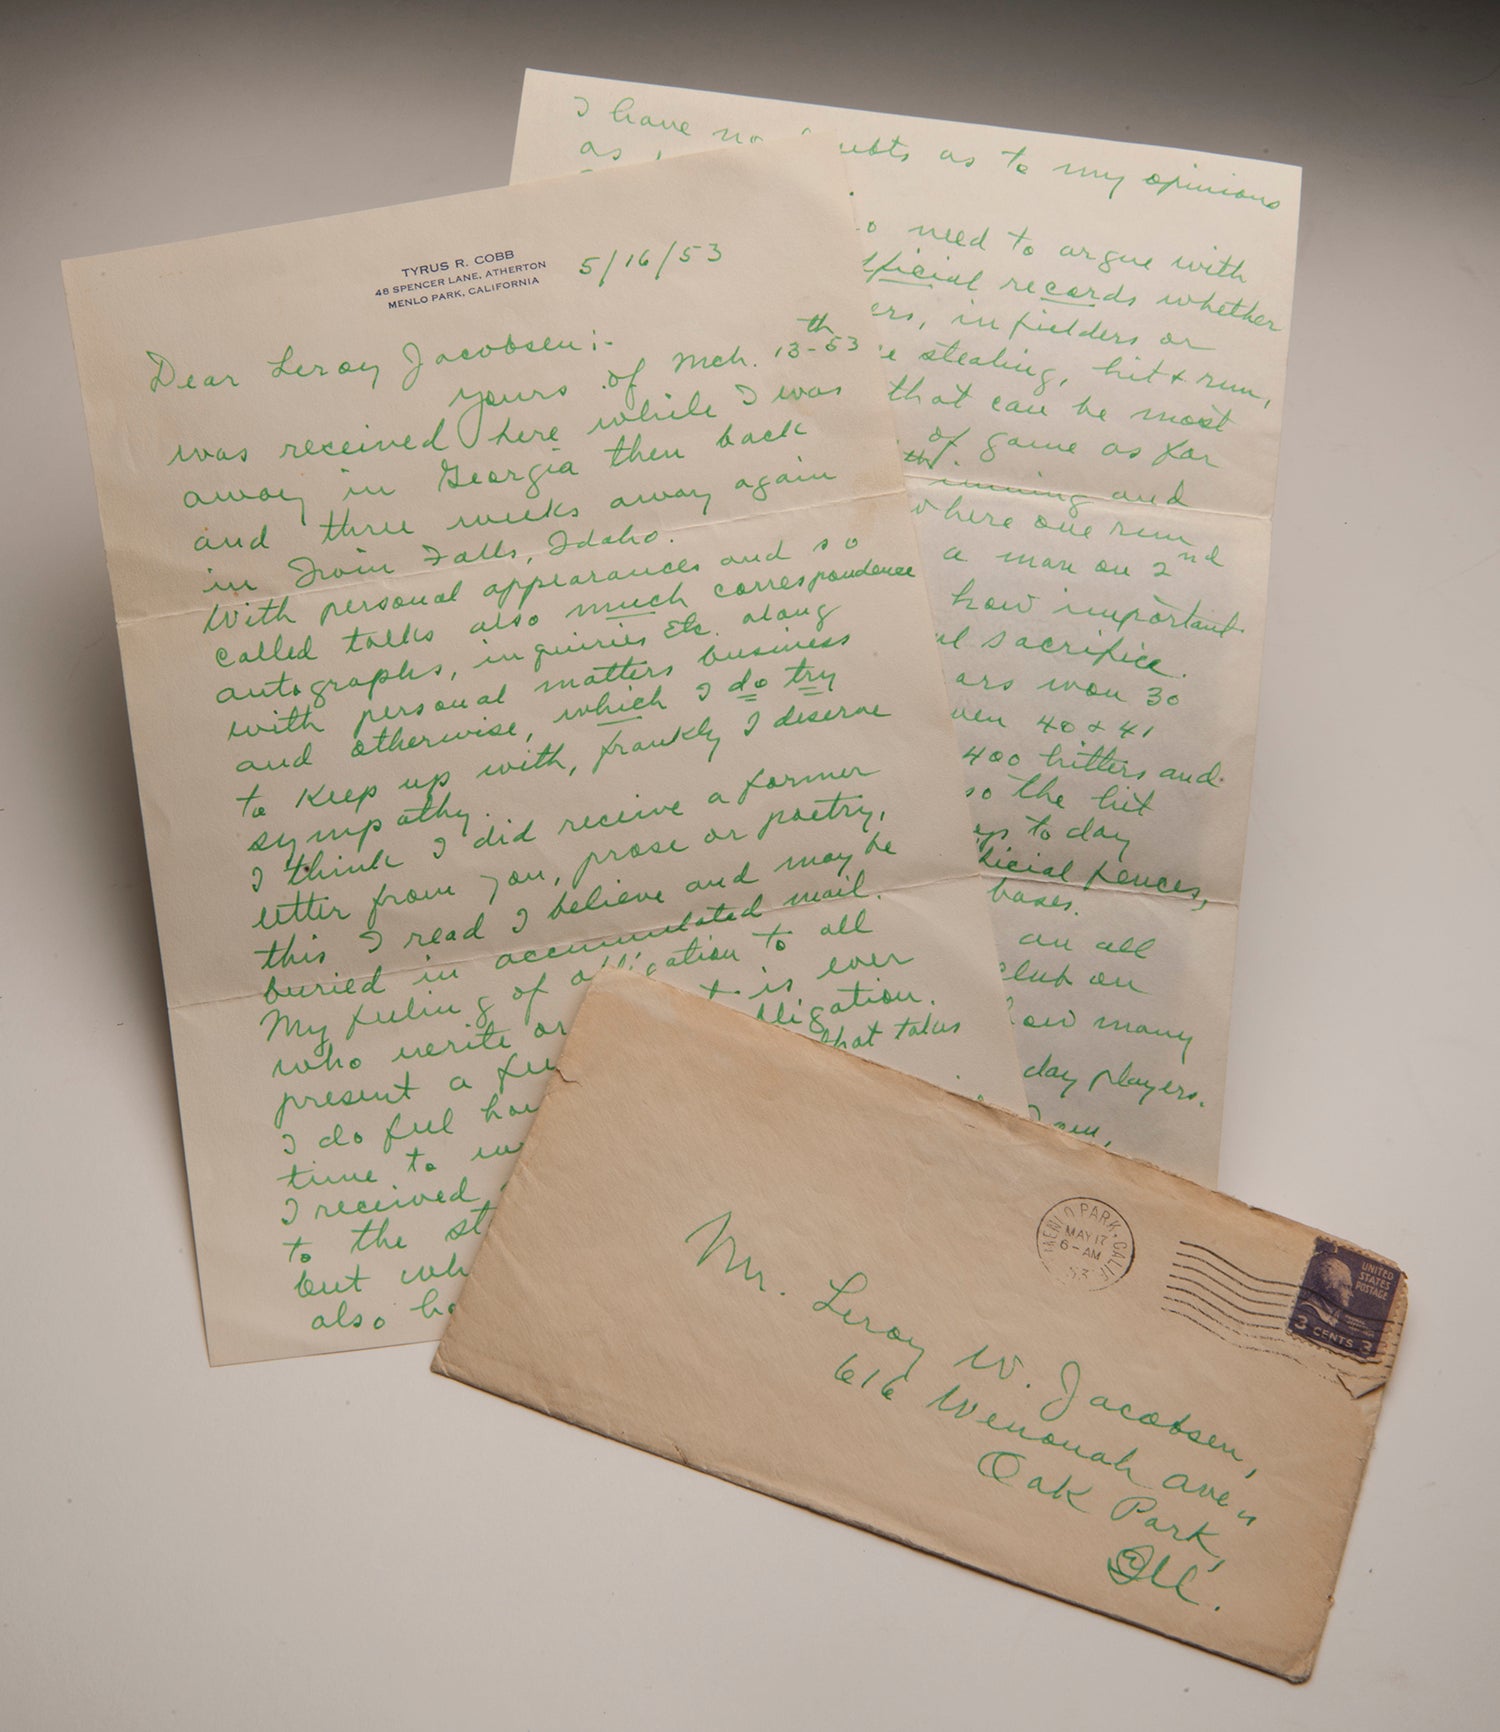 #Shortstops: Letters from Ty Cobb